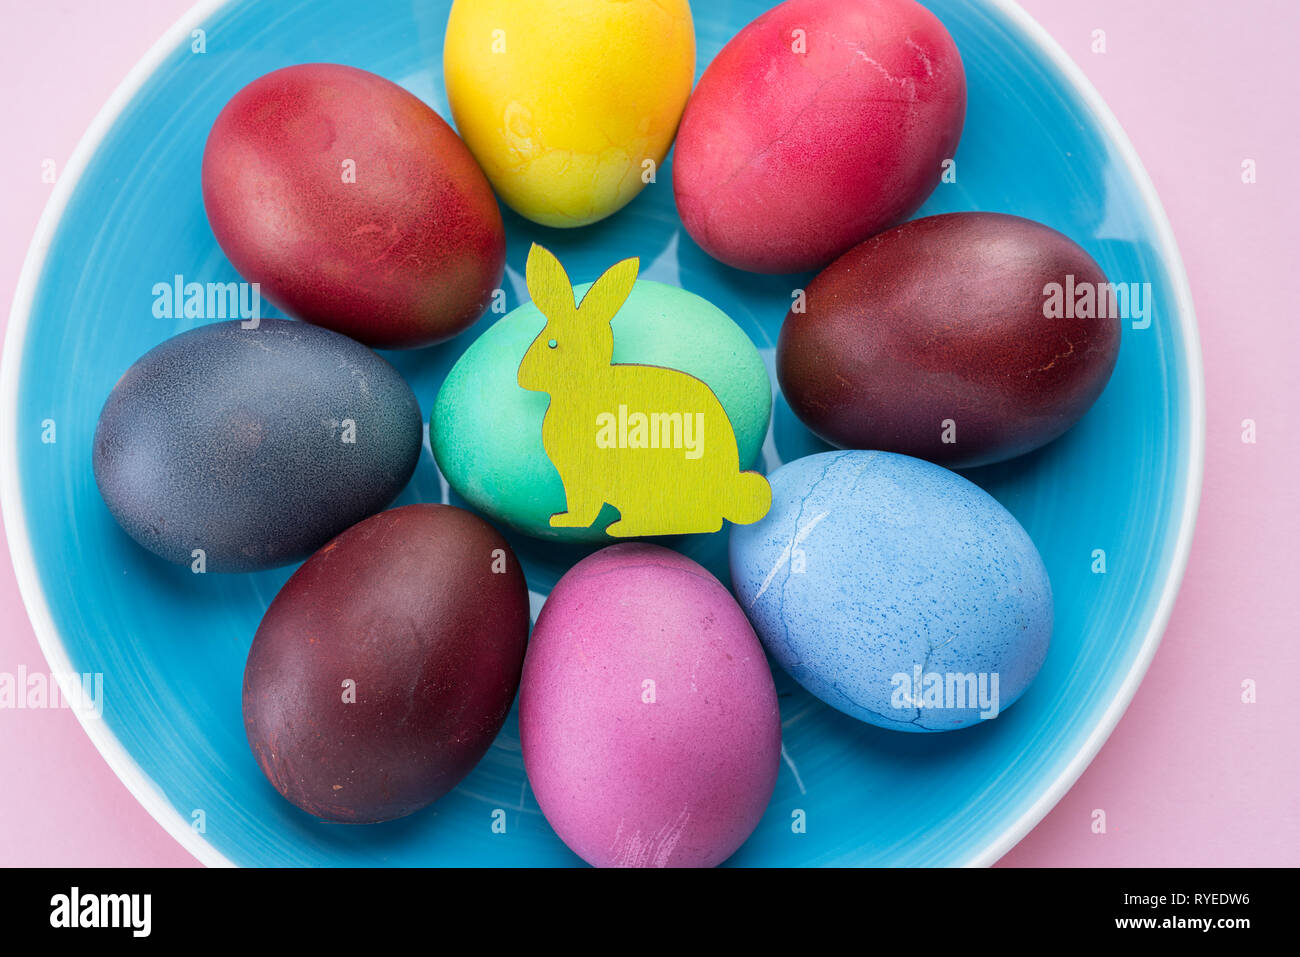 Colorful Easter eggs as an attribute of Easter celebration. Pink background. Stock Photo